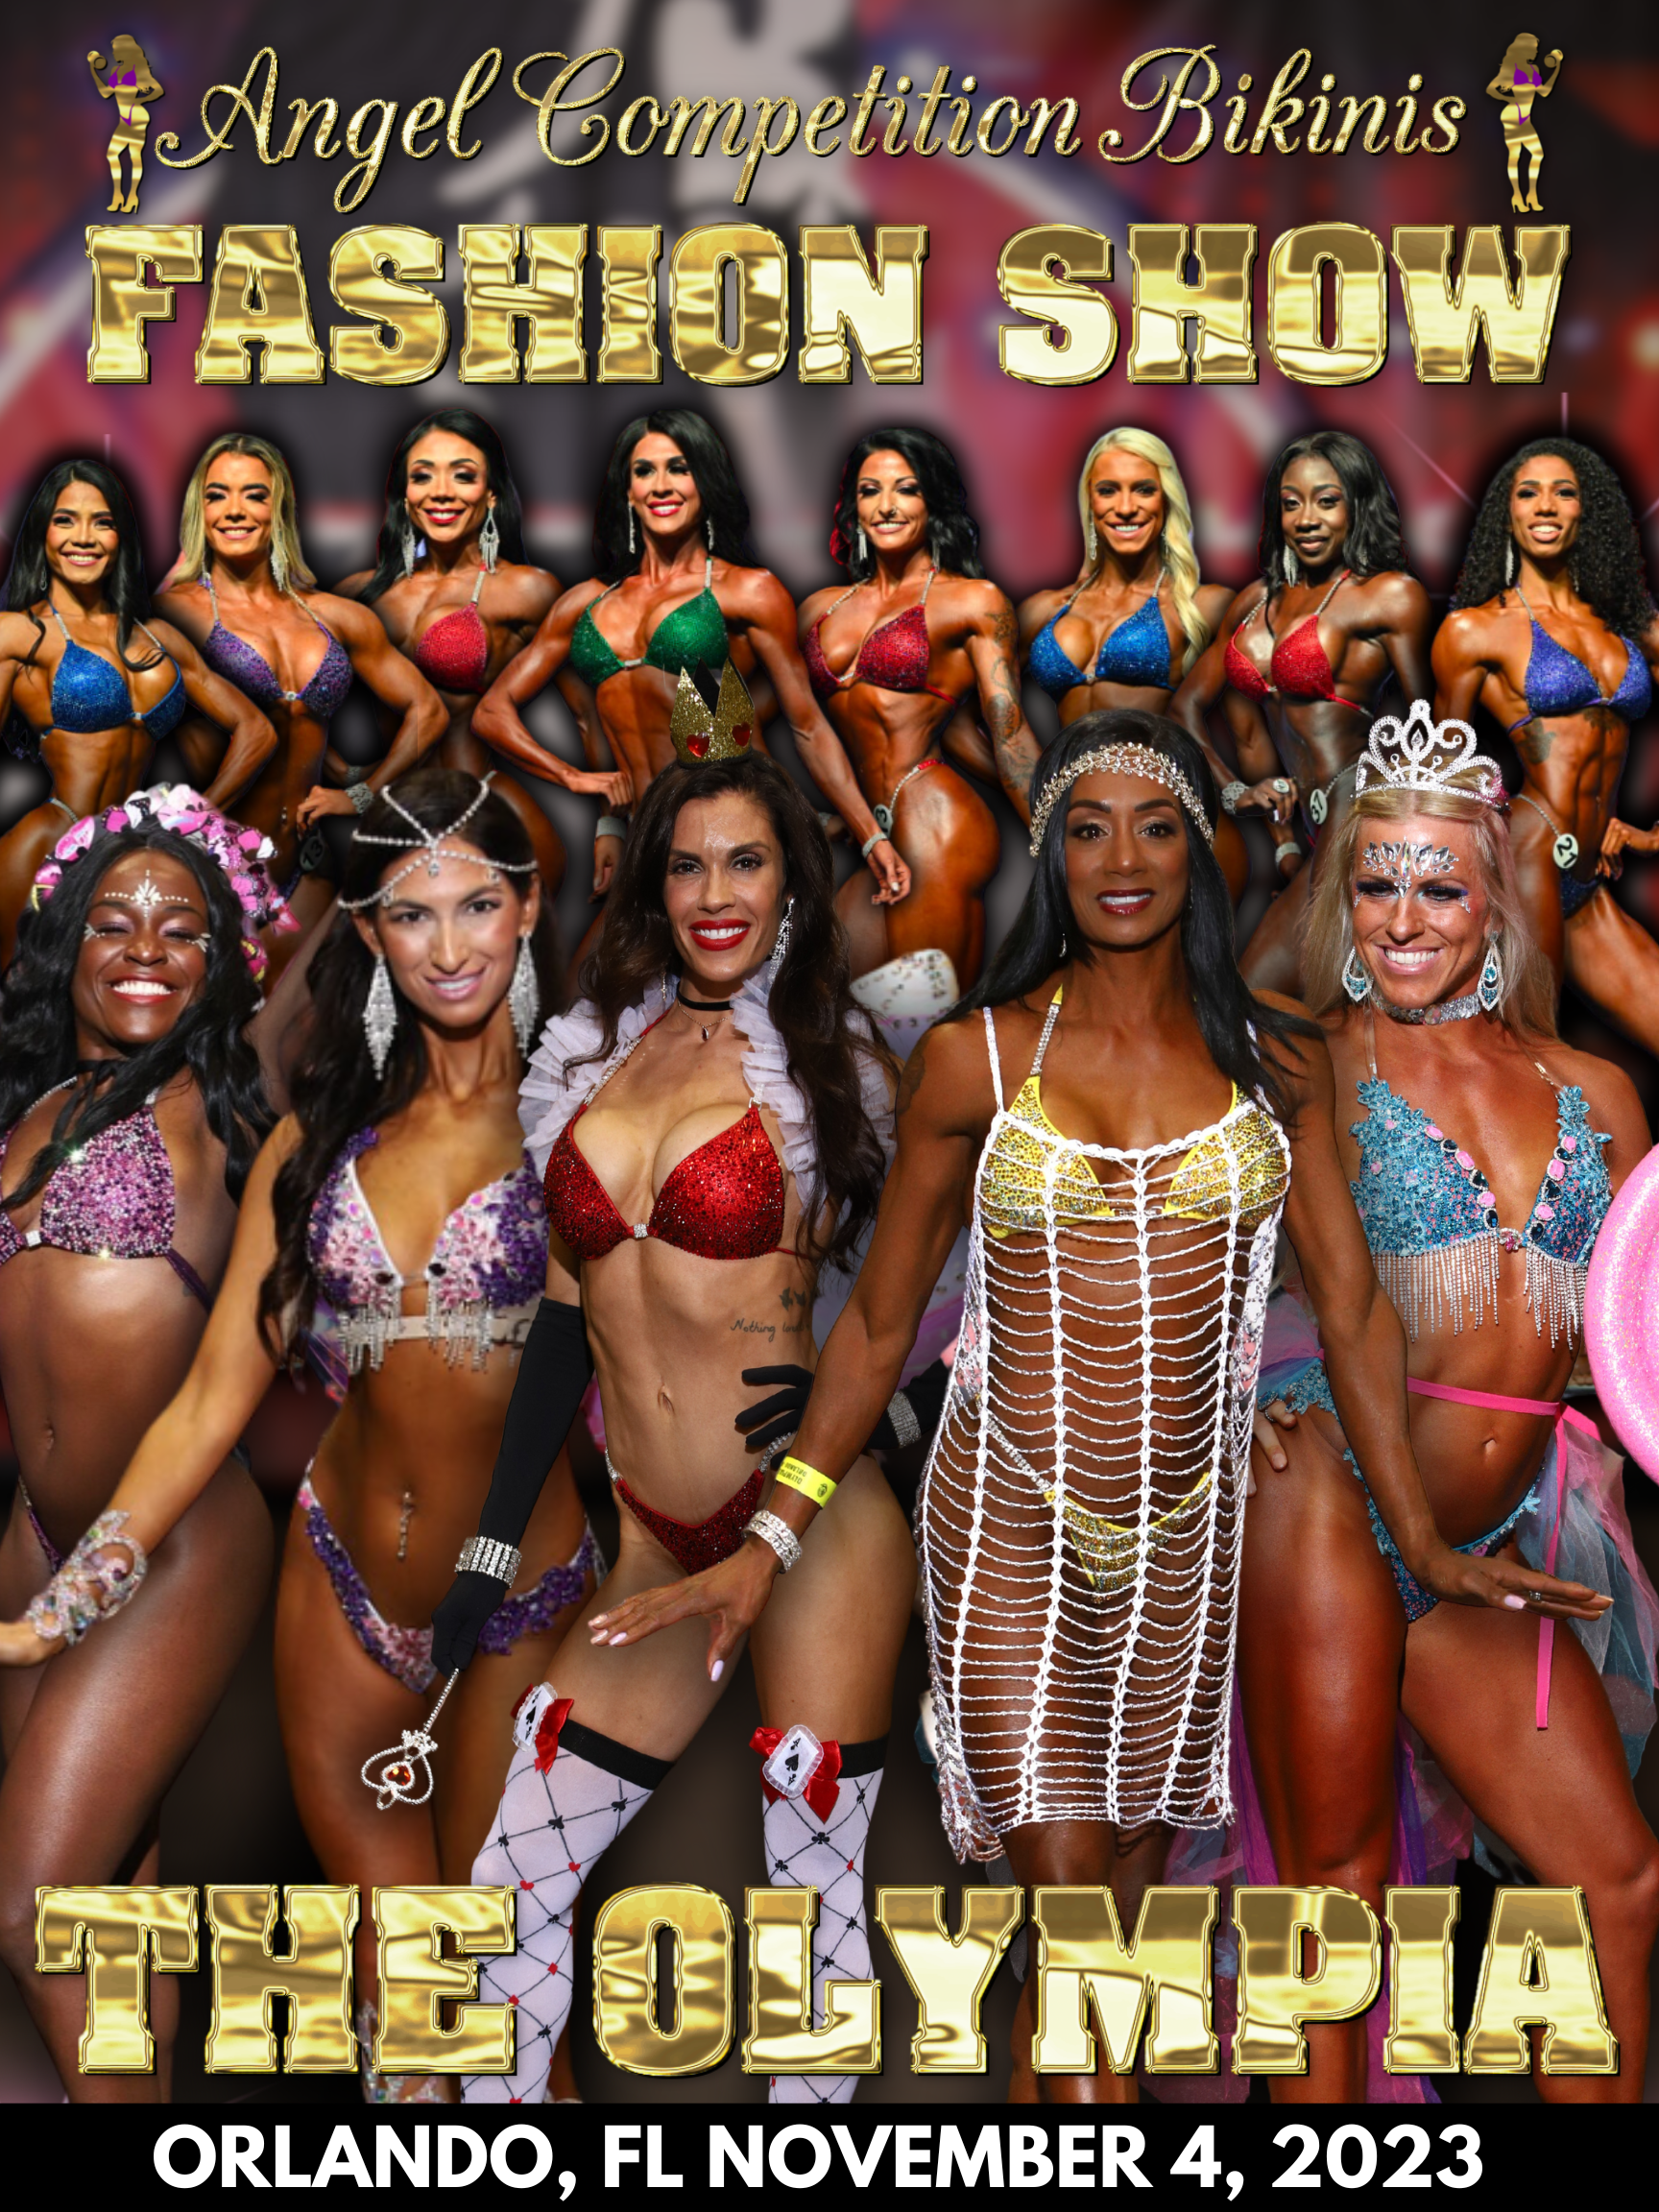 The why behind the Angel Fashion Show. Making women feel confident all stages in their journey. Showing the world that a strong and muscular woman is beautiful!! Walk in an Angel Fashion Show put on by Angel Competition Bikinis to feel confident in your body and show the world. Apply at angelfashionshow.com or angelcompetitionbikinis.com the best source for your competition suit. 